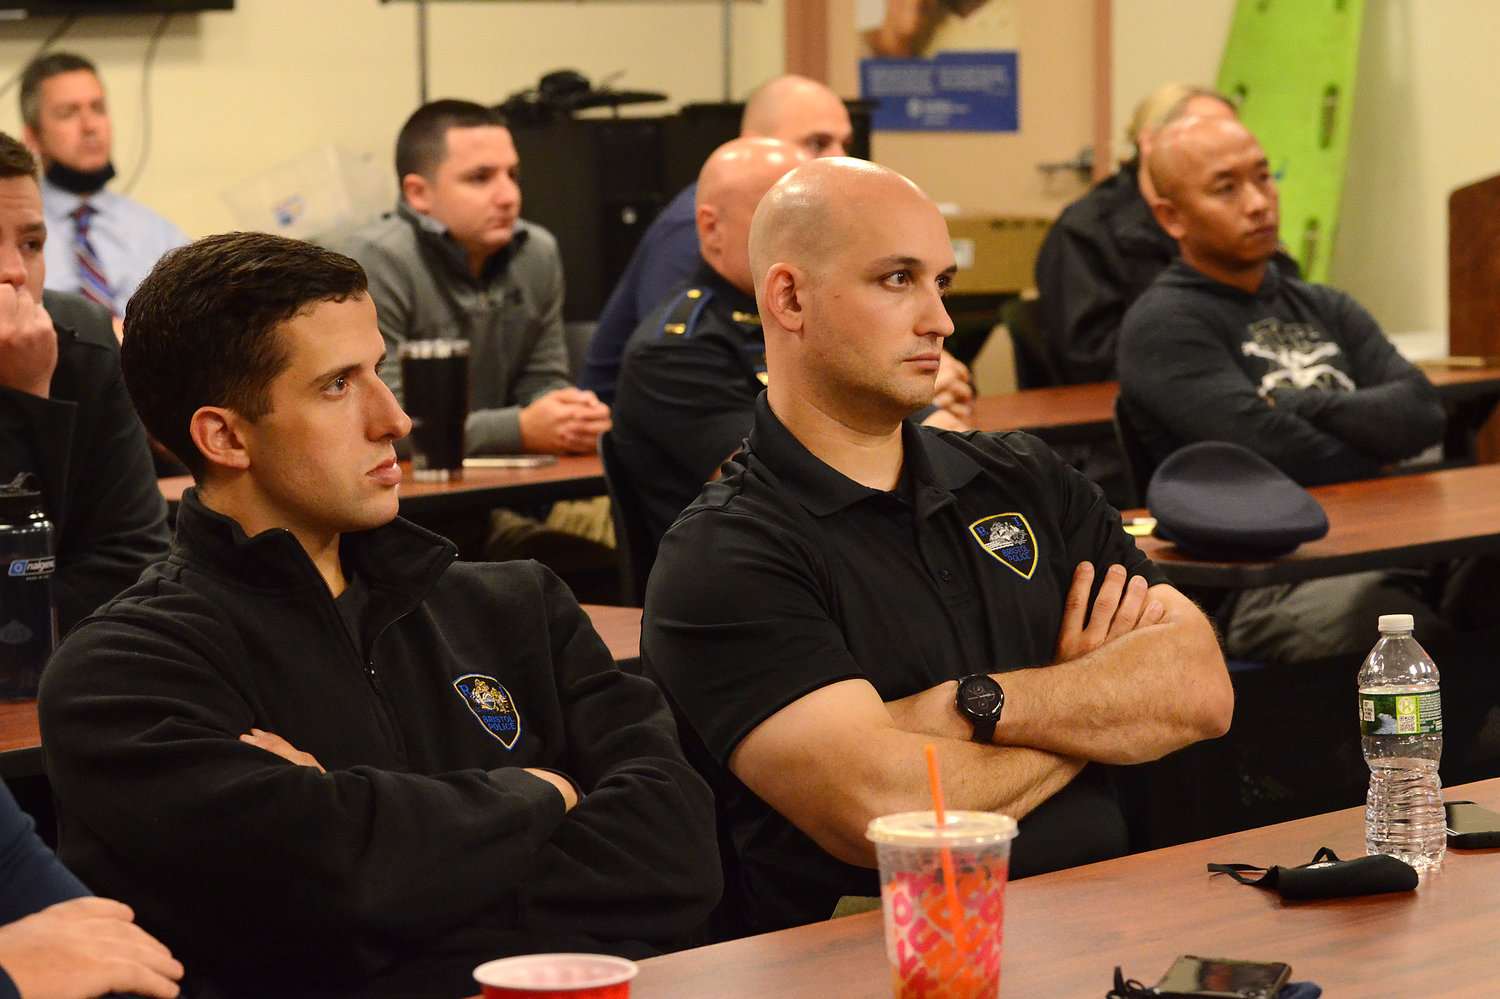 Bristol police officers (from left) Adam Almeida and Alex Booth look on as state troopers conduct a diversity training for the department on Wednesday.